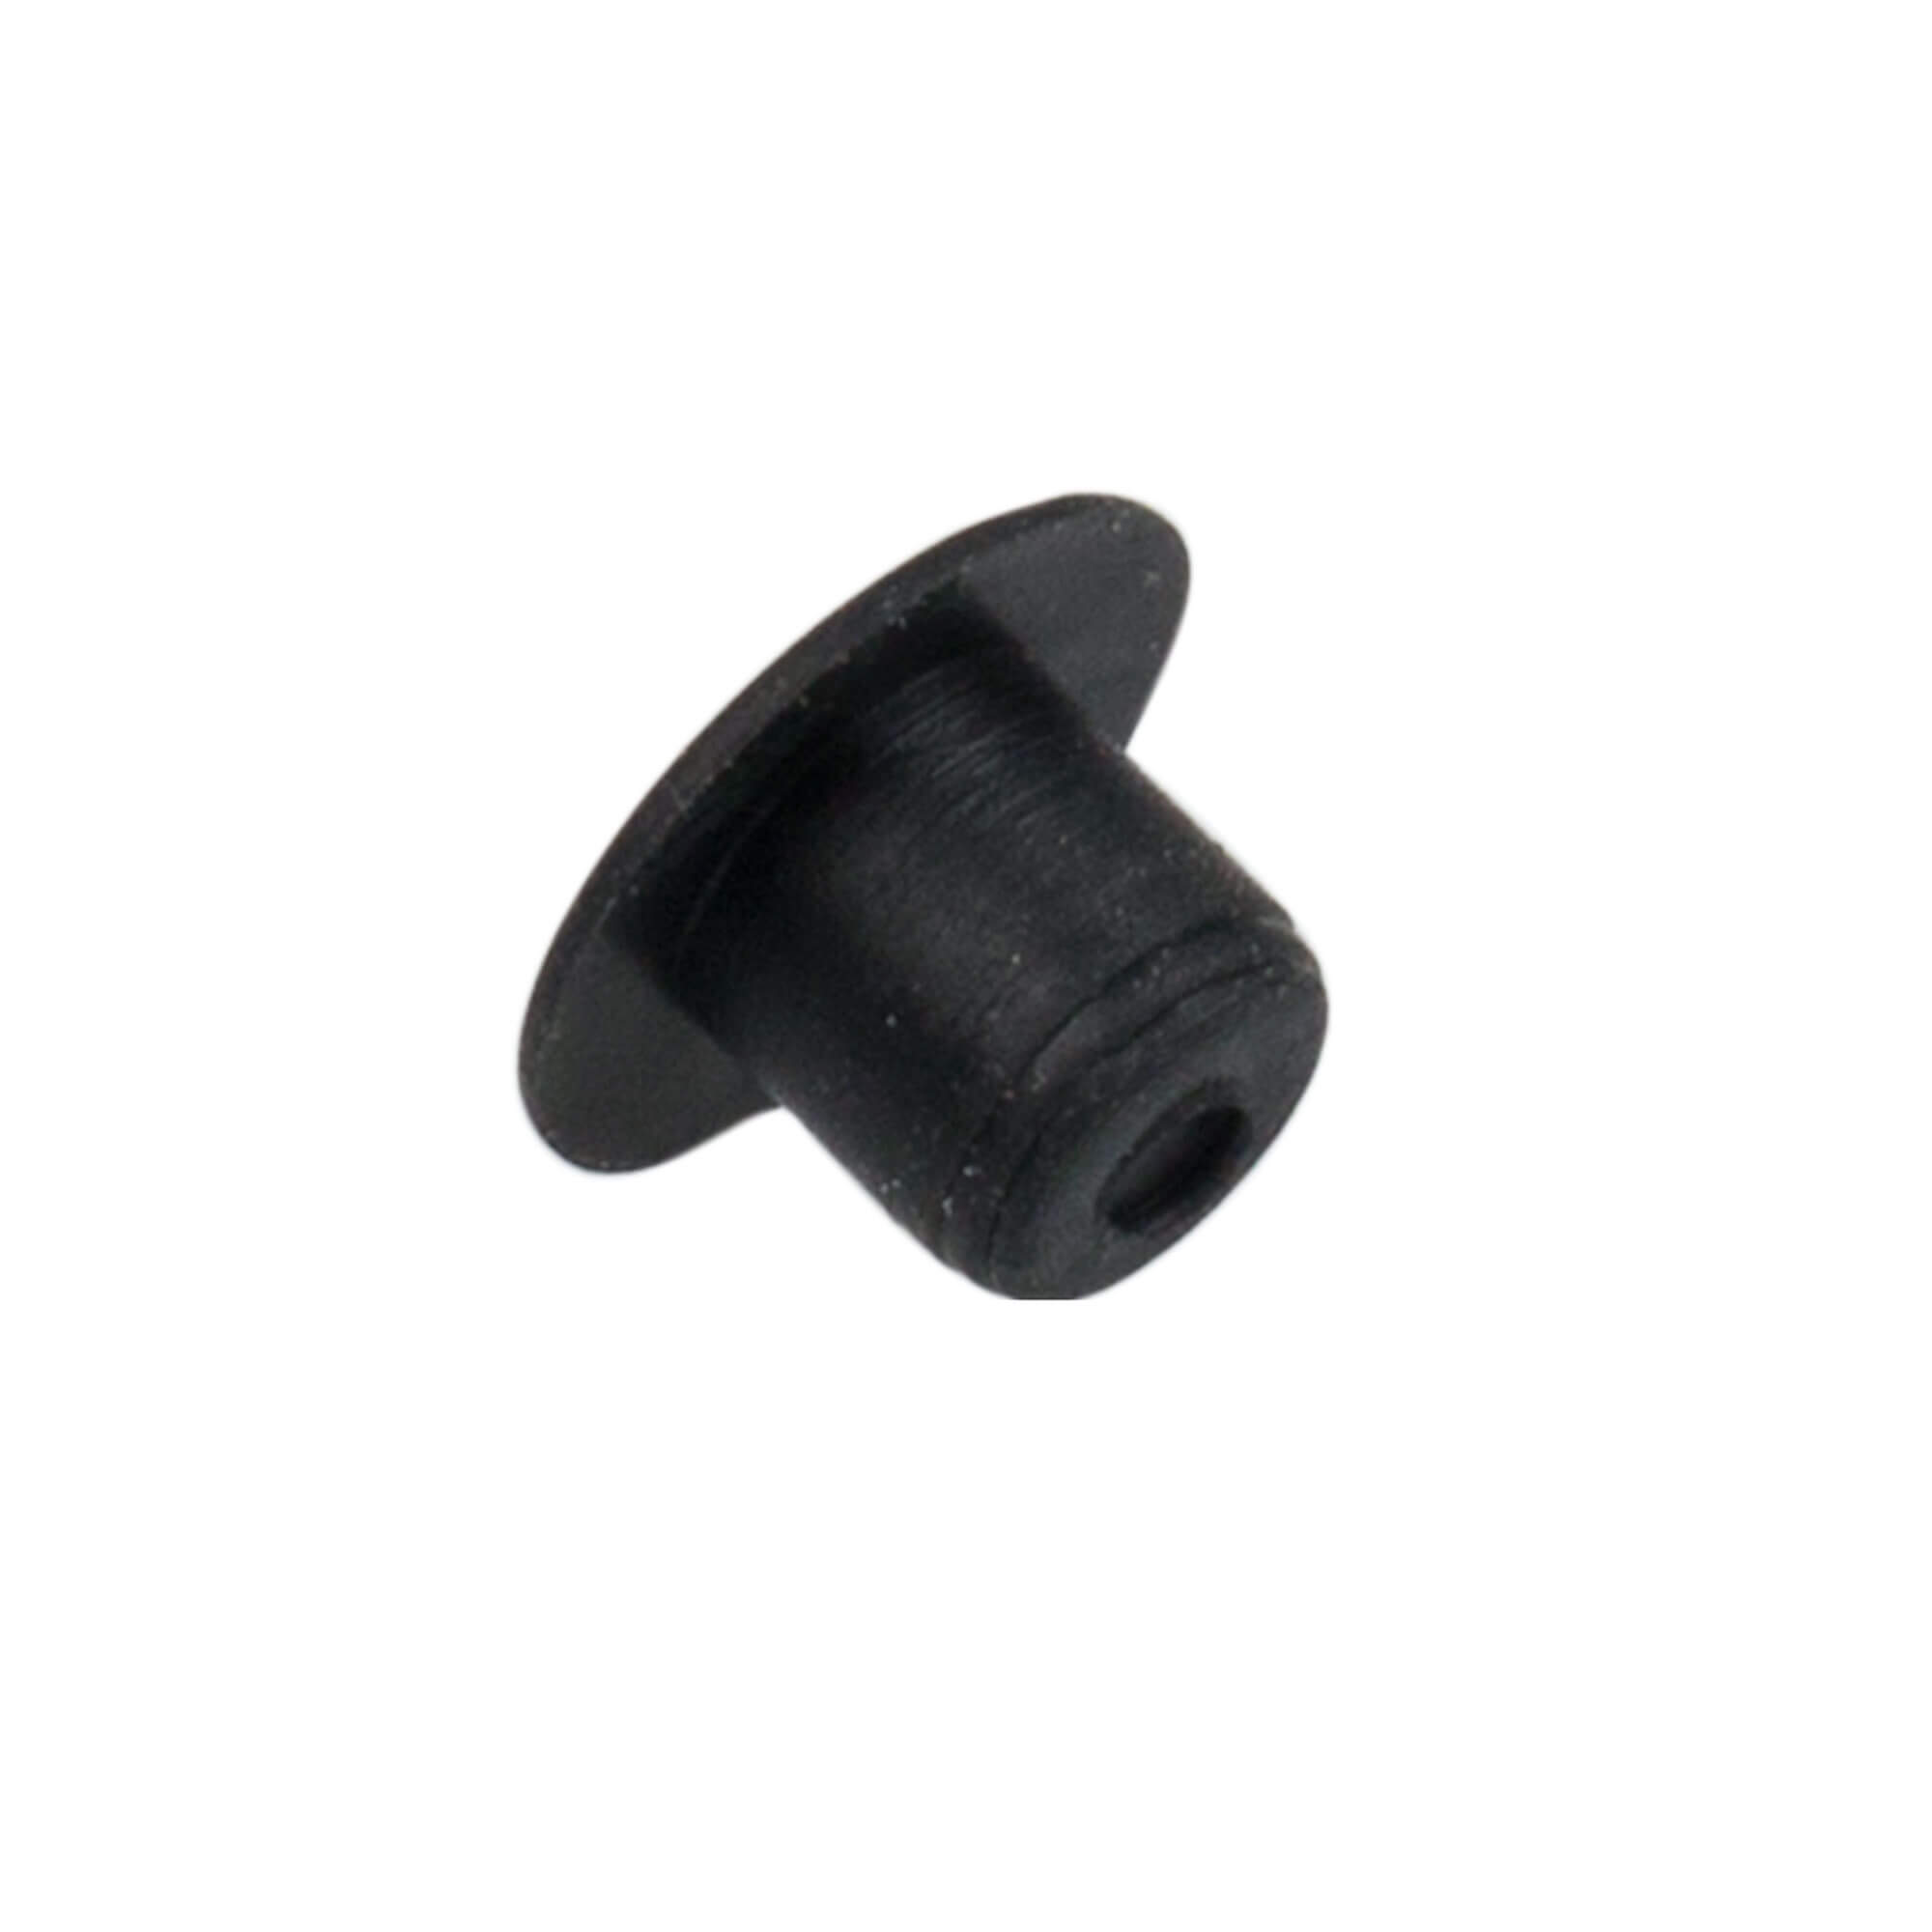 Setscrew stopper - spare part for Cancan manual juicer